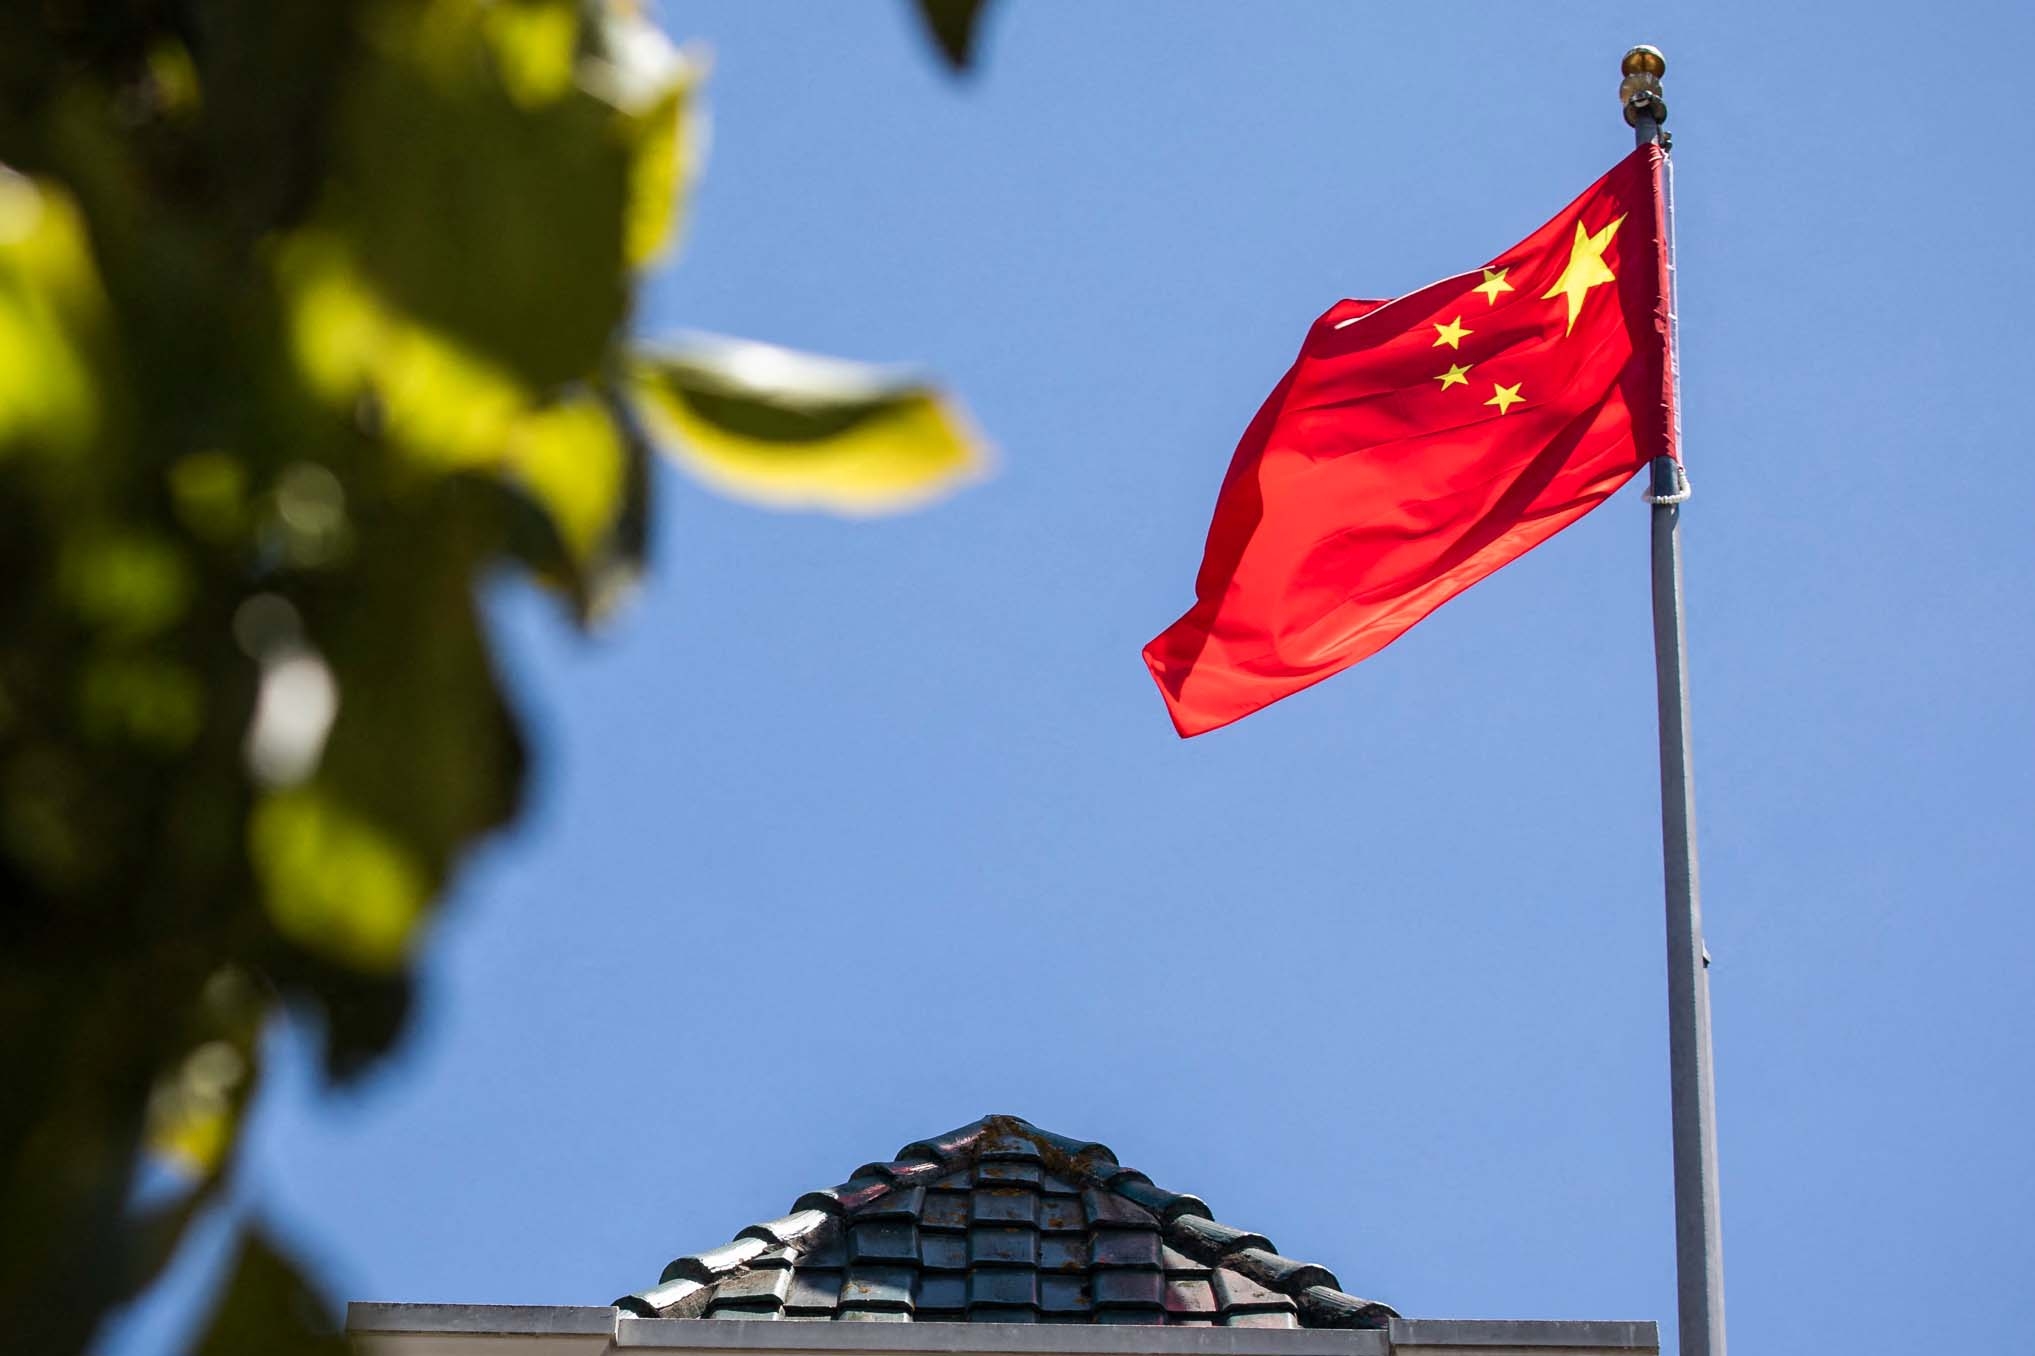 The flag of the People's Republic of China flies above the country's consulate in San Francisco, California, on 23 July 2020.